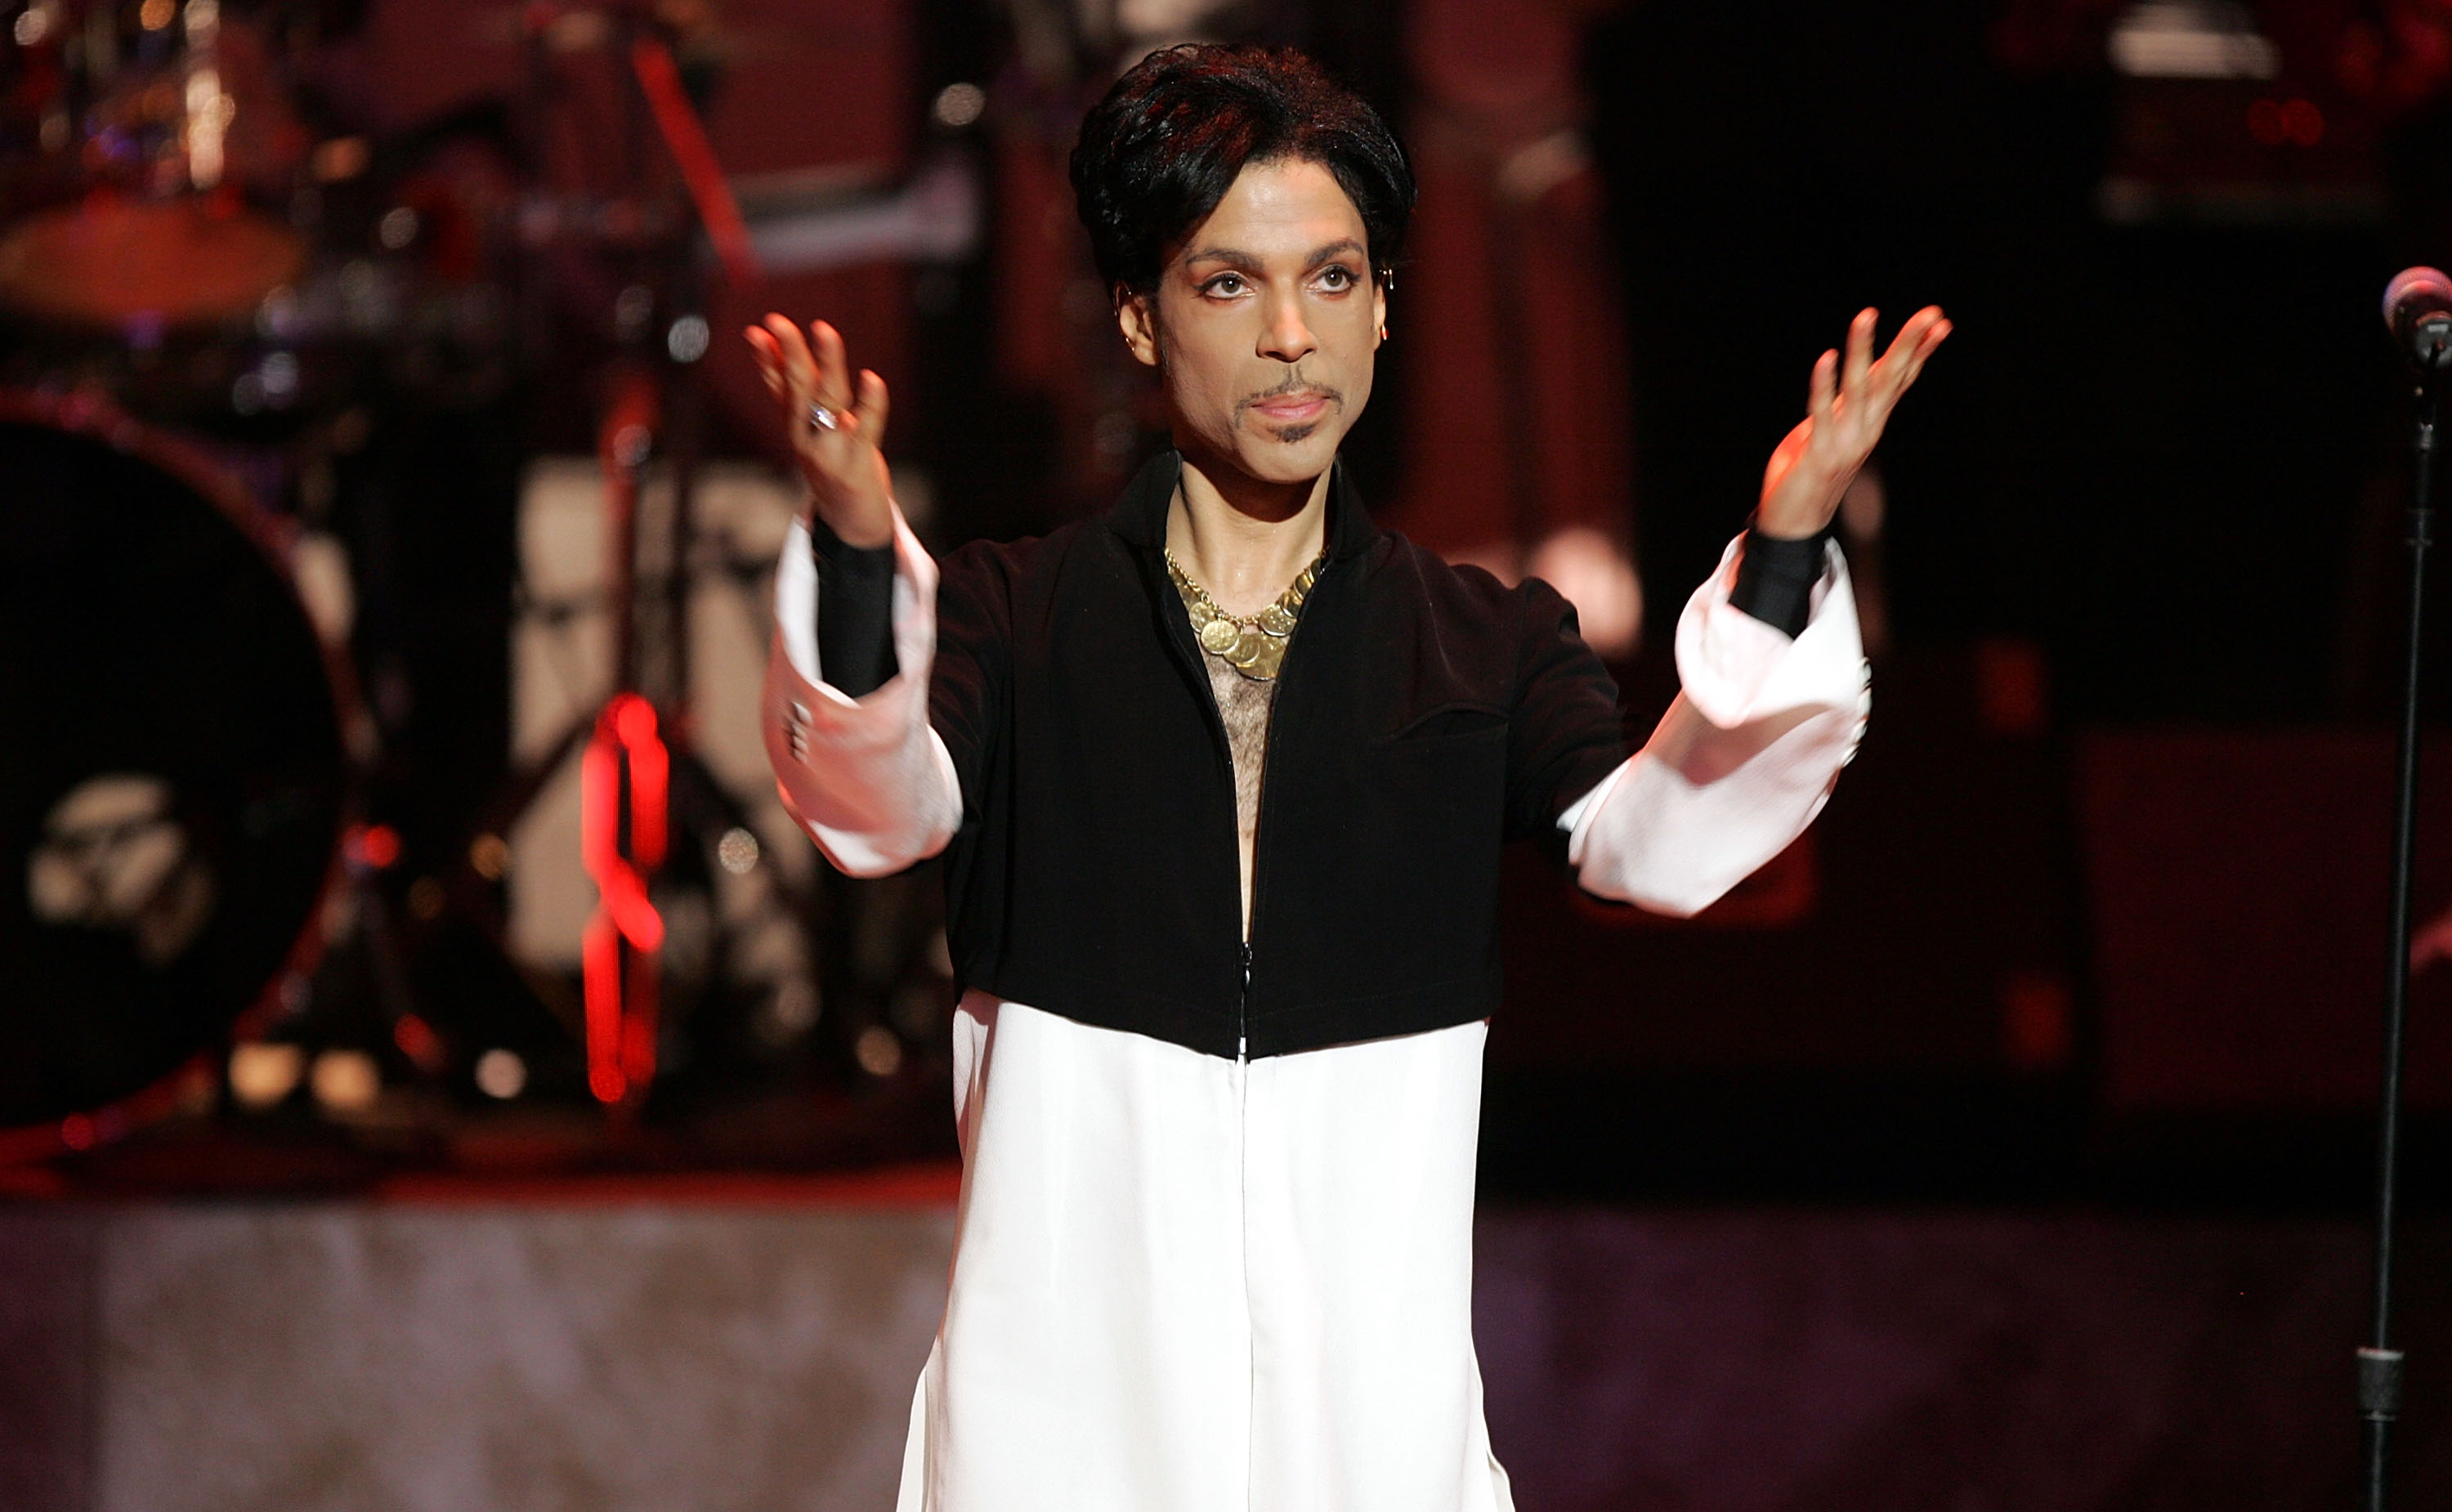 The estate of late singer Prince has filed a federal lawsuit against Jay-Z's entertainment company Roc Nation. (Kevin Winter—Getty Images)